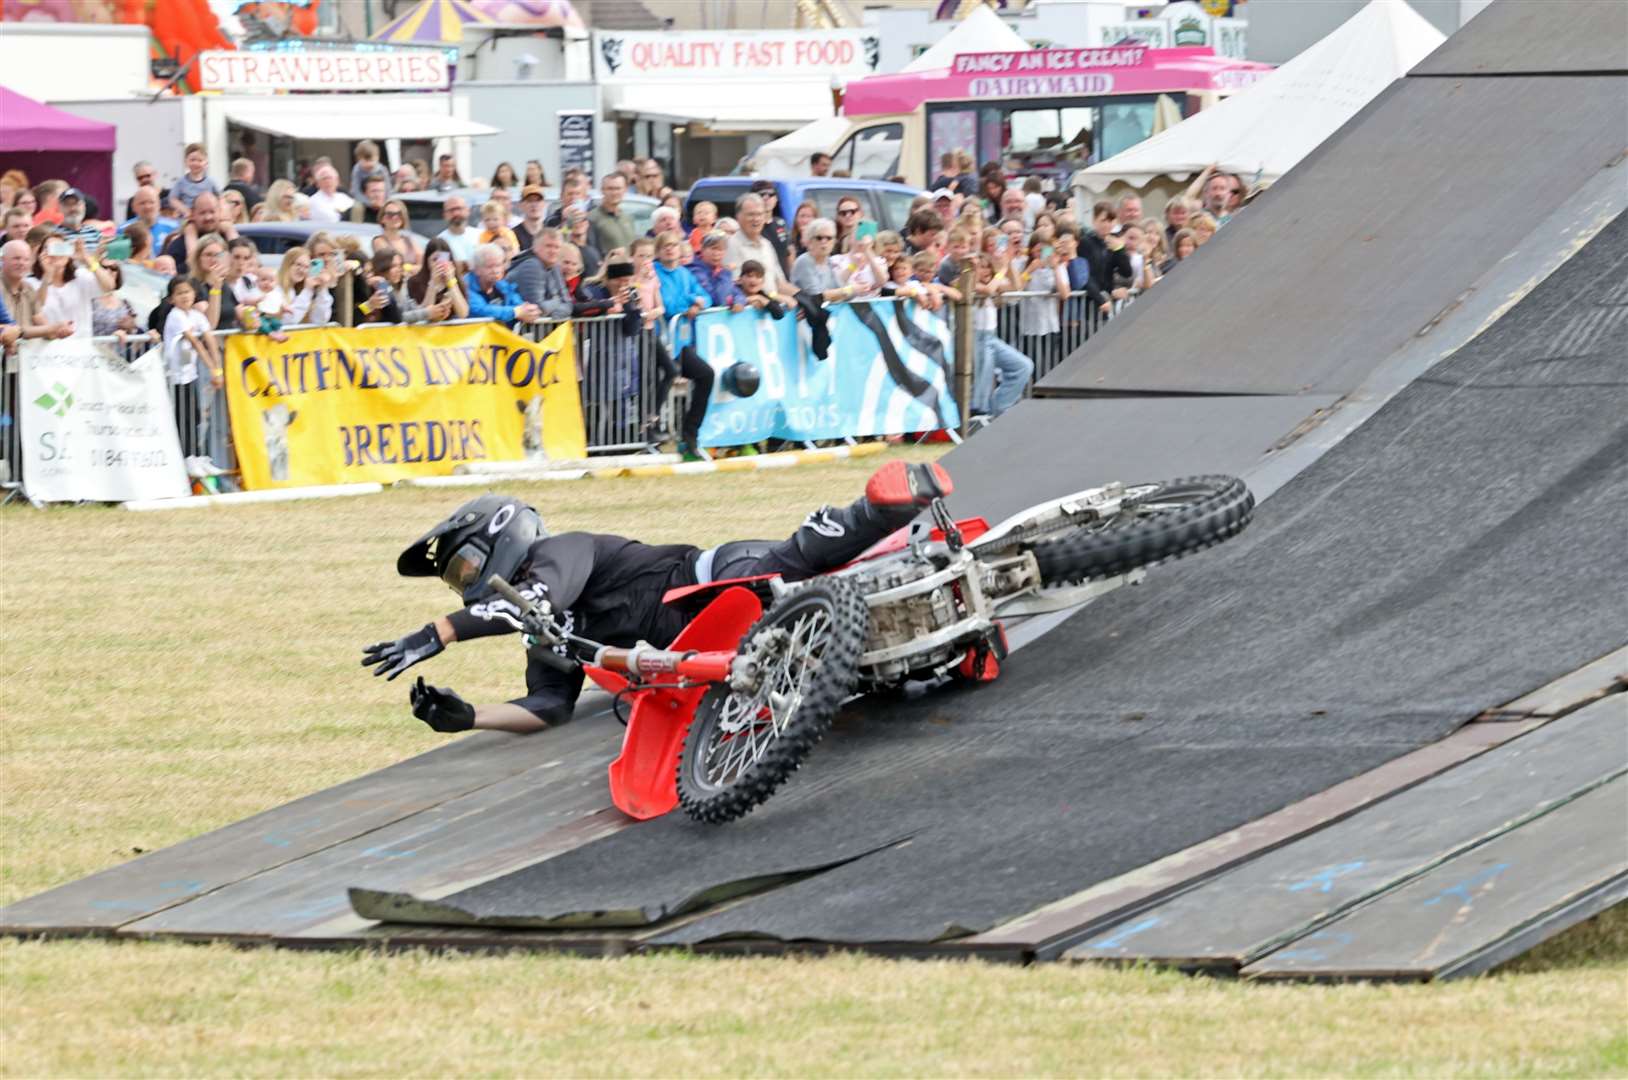 Stunt rider John Pearson of Broke FMX had a fall at the end of his final jump in the main ring. Picture: James Gunn